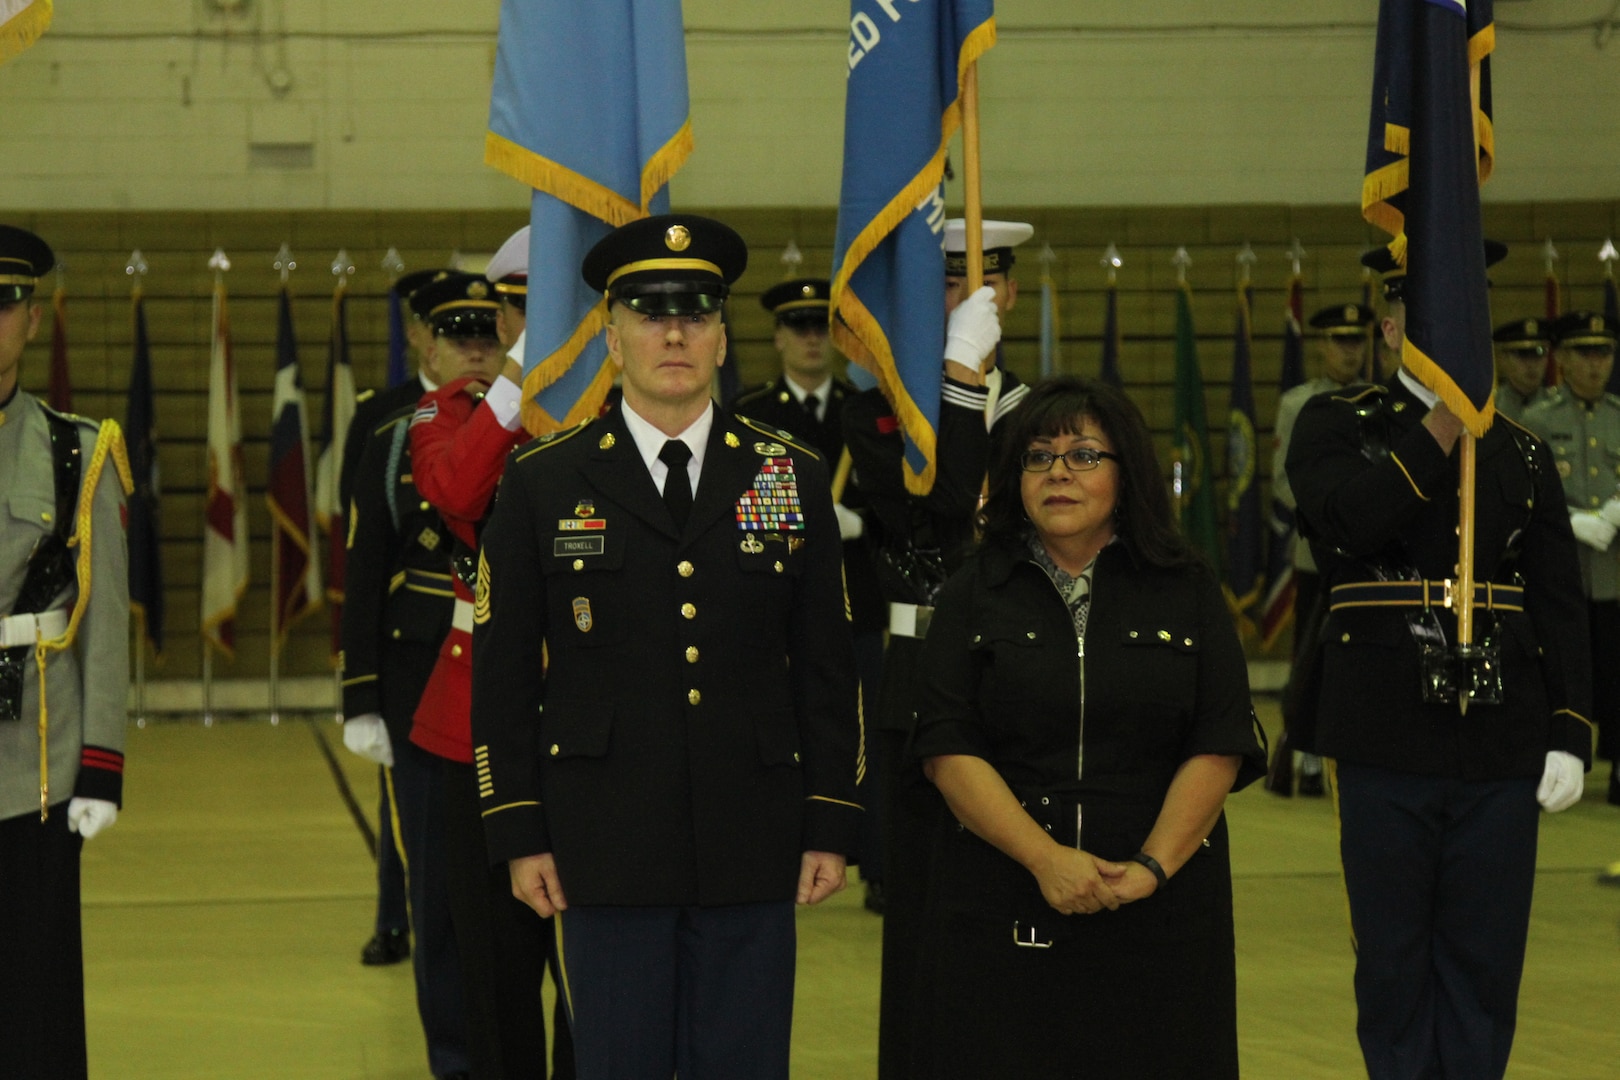 United States Forces Korea Command Sgt. Maj. John Troxell stands with his wife, Sandra Troxell, during his outgoing ceremony on U.S. Army Garrison Yongsan on December 2, 2015. Troxell was selected to become the 20th Senior Enlisted Advisor to the Chief of Staff. (U.S. Army photo by Cpl. Choi, Woo-hyuk)